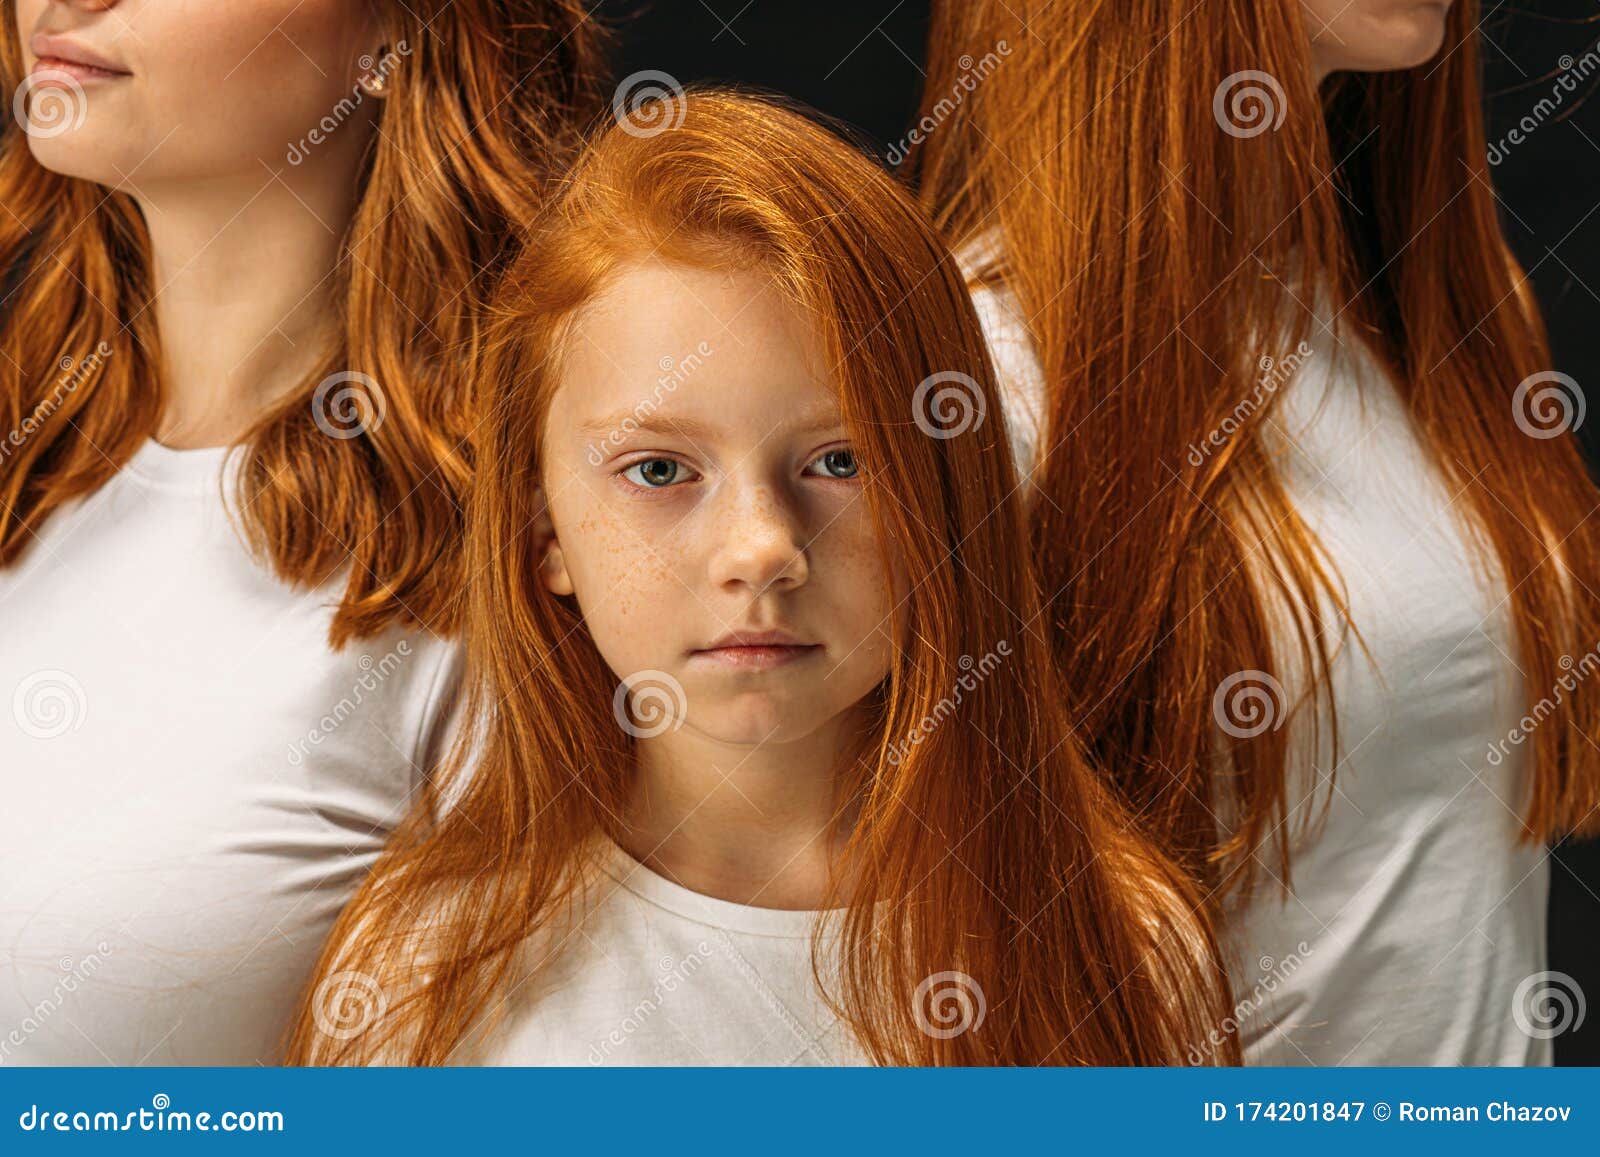 Redhead Little Girl with People with the Same Hair Colour in the Background  Stock Image - Image of couple, closeup: 174201847